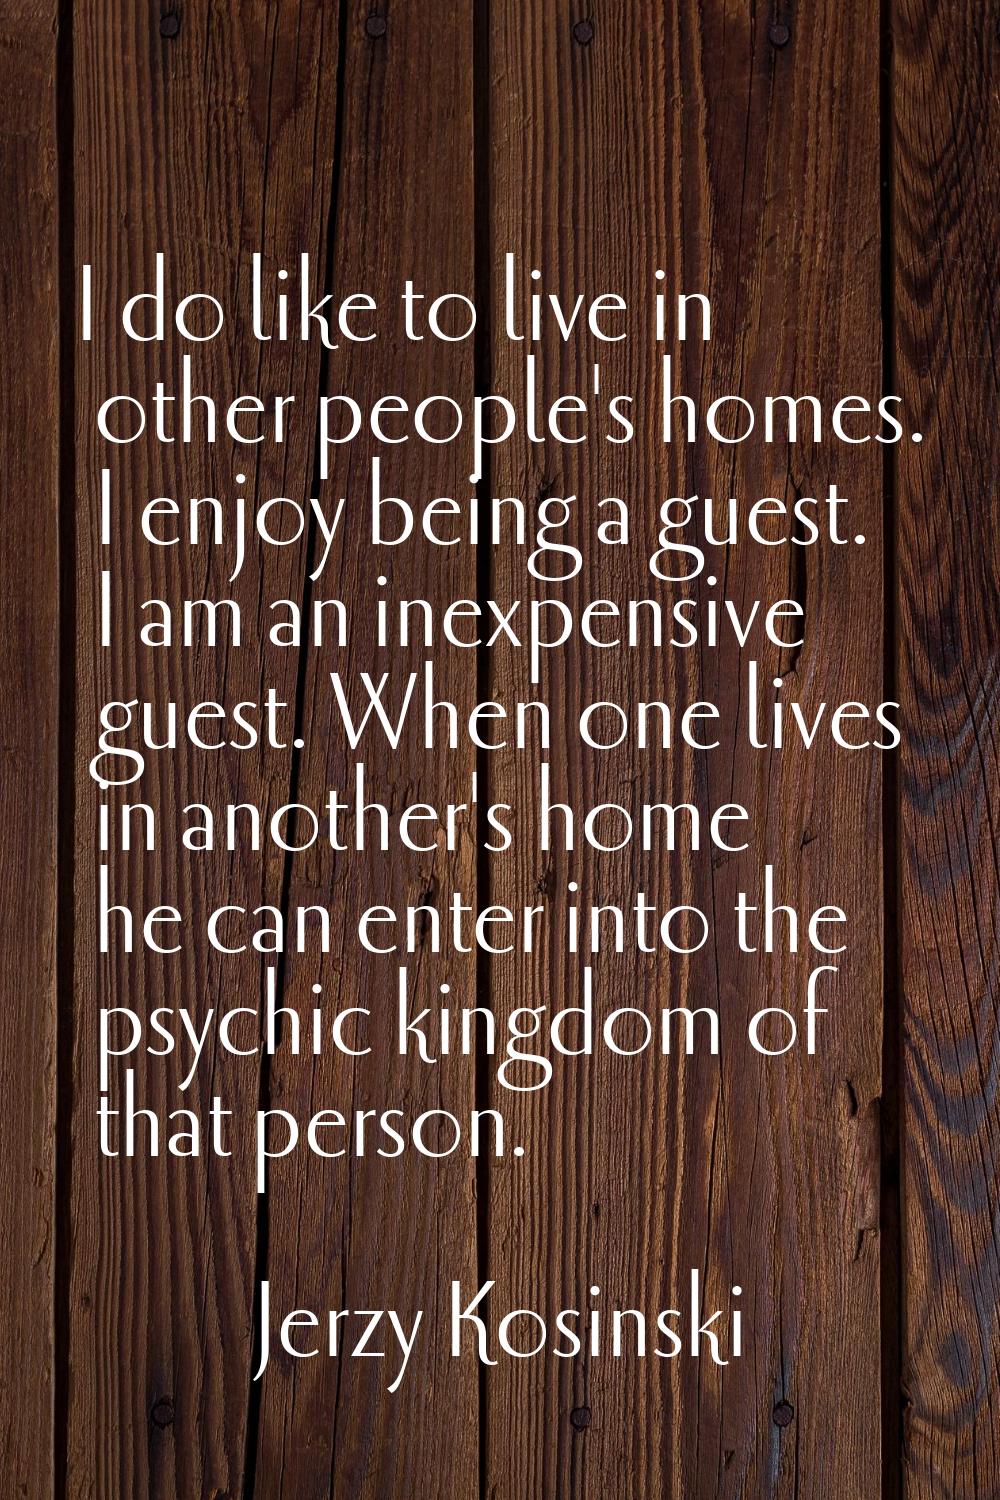 I do like to live in other people's homes. I enjoy being a guest. I am an inexpensive guest. When o